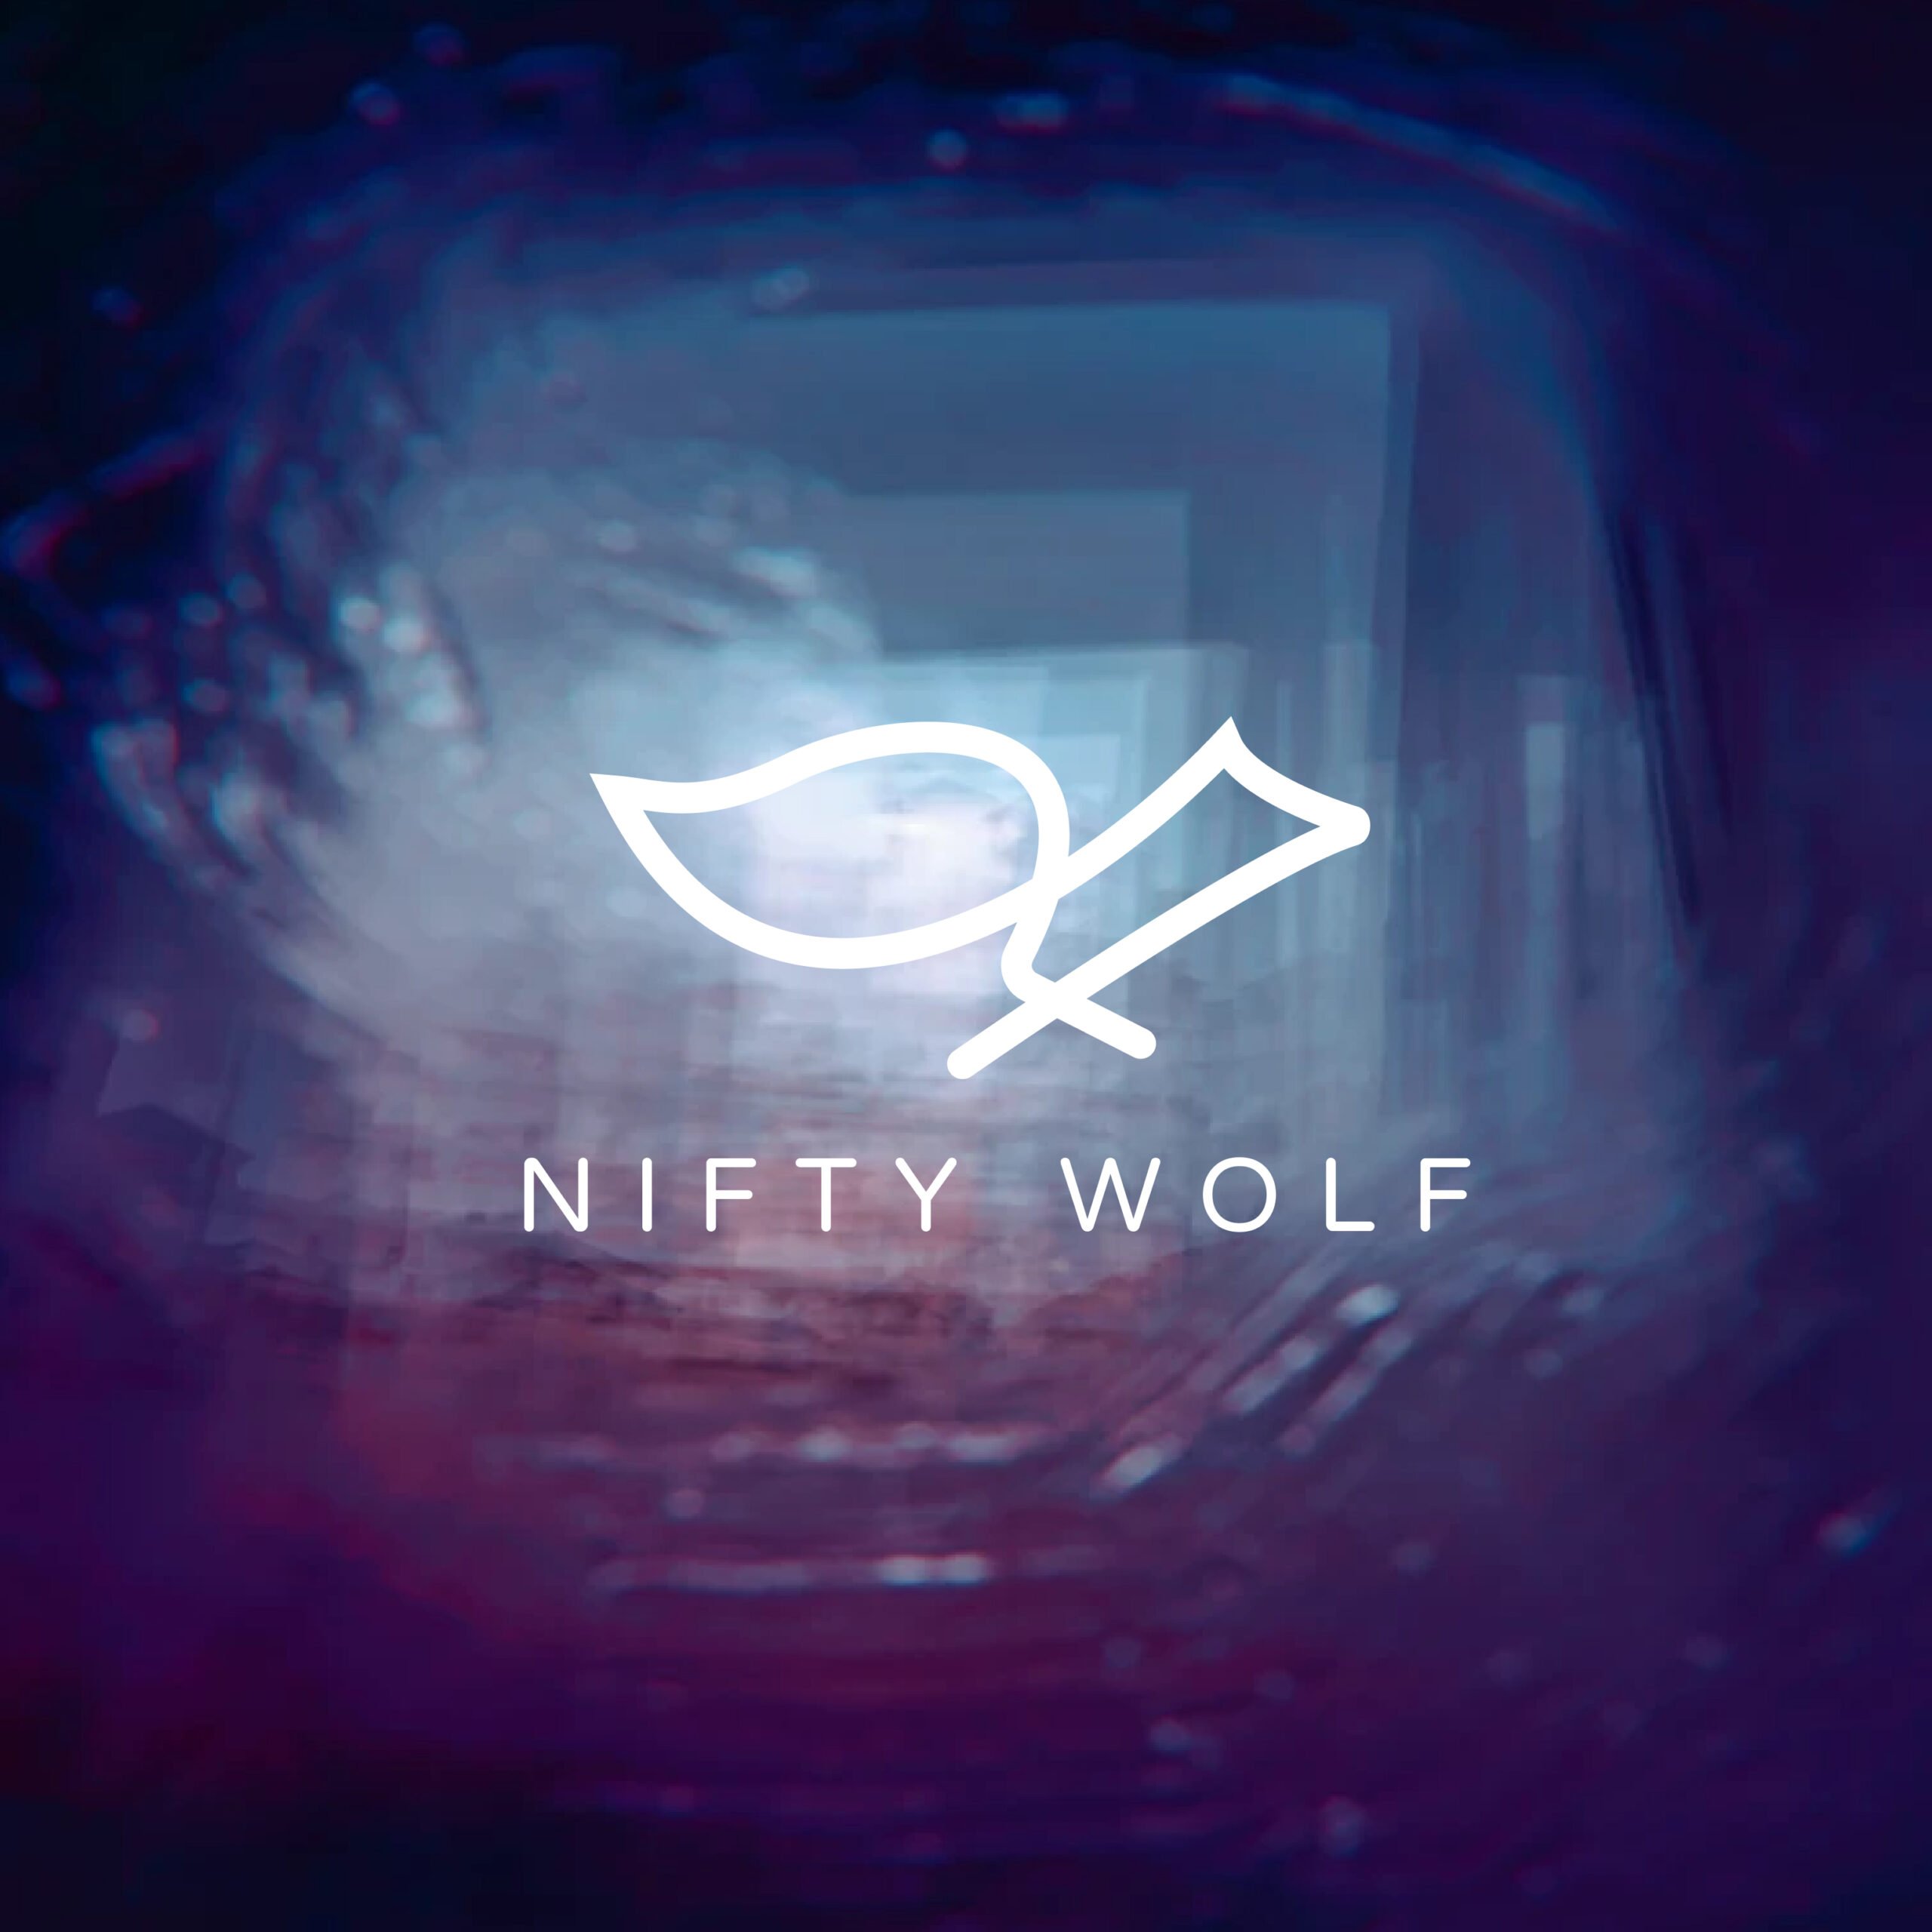 A logo showing the nifty wolf brand design